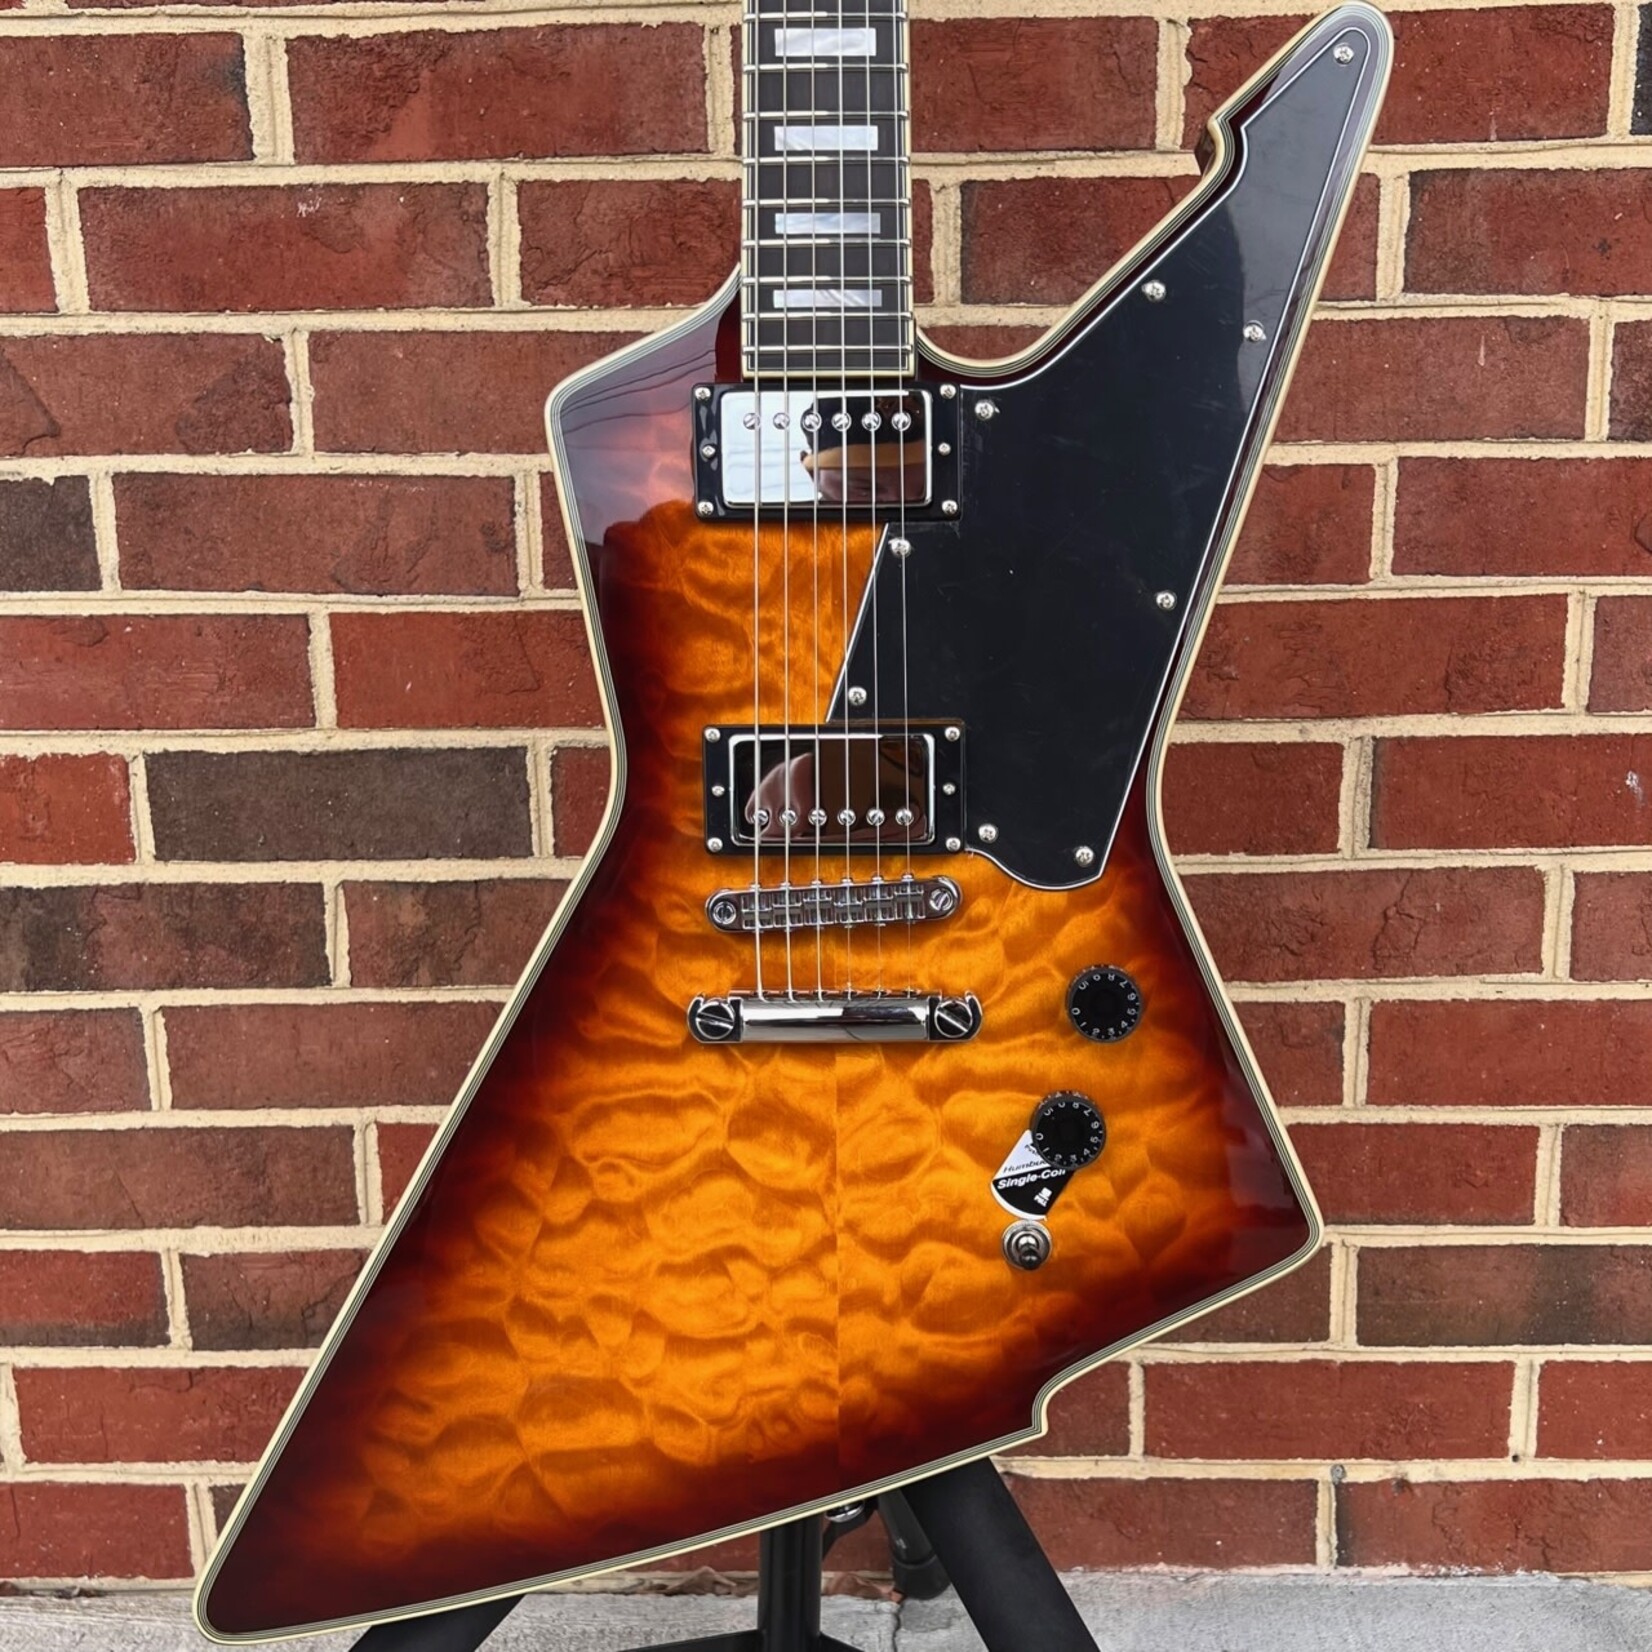 Schecter Guitar Research Schecter E-1 Custom, Vintage Sunburst, Quilted Maple Top, Ebony Fretboard, Locking Tuners, Schecter USA Sunset Strip/Pasadena Pickups, SN# W23111835